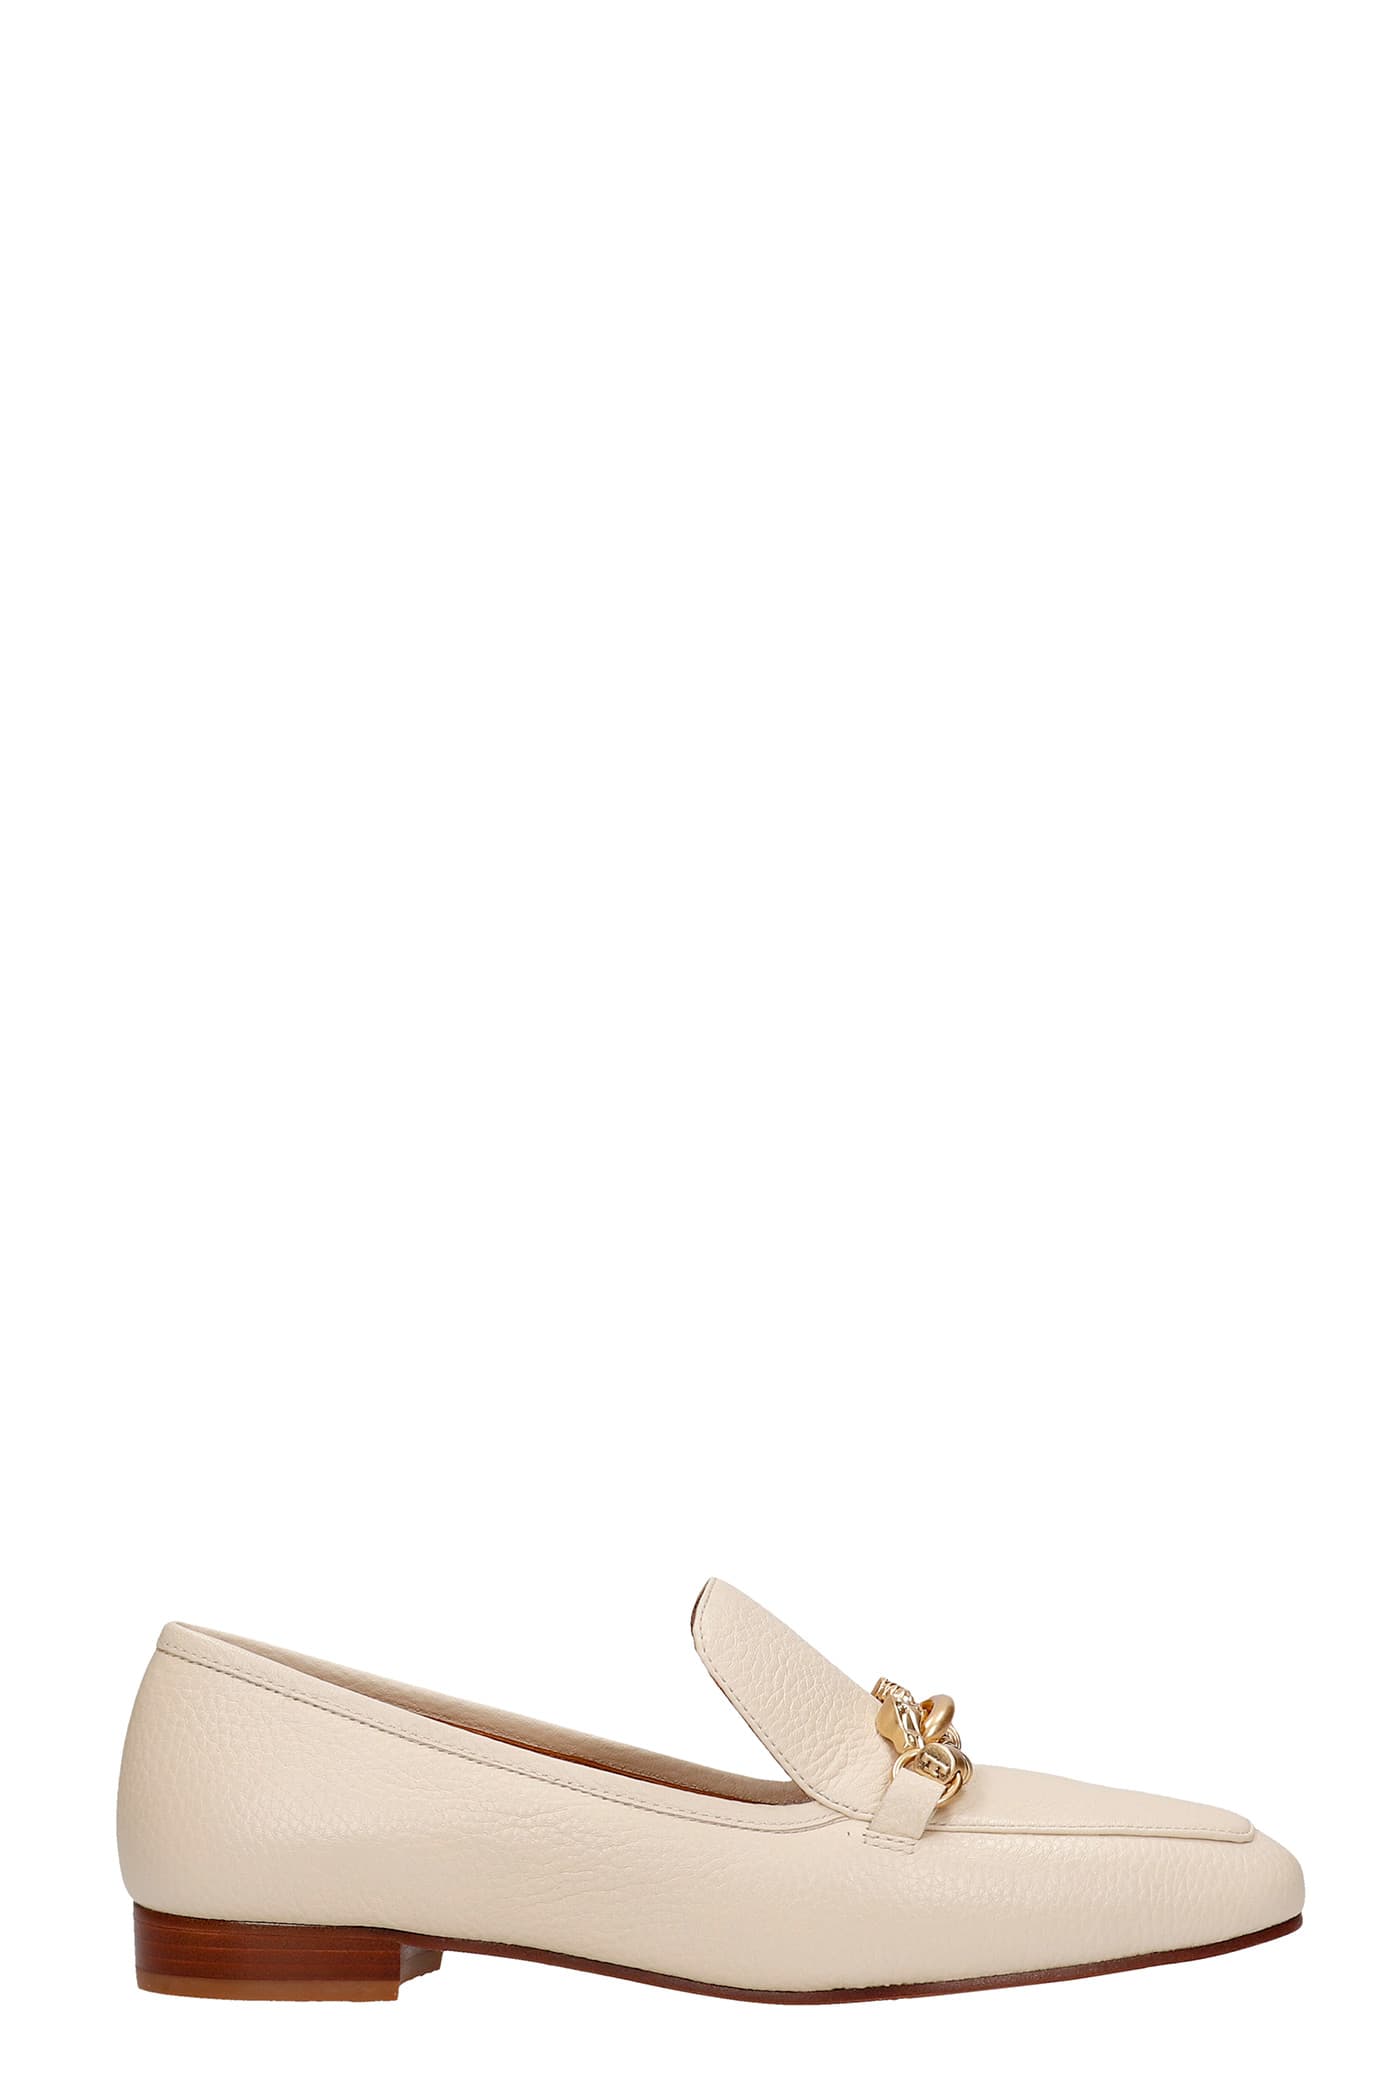 Buy Tory Burch Jess Loafers In Beige Leather online, shop Tory Burch shoes with free shipping